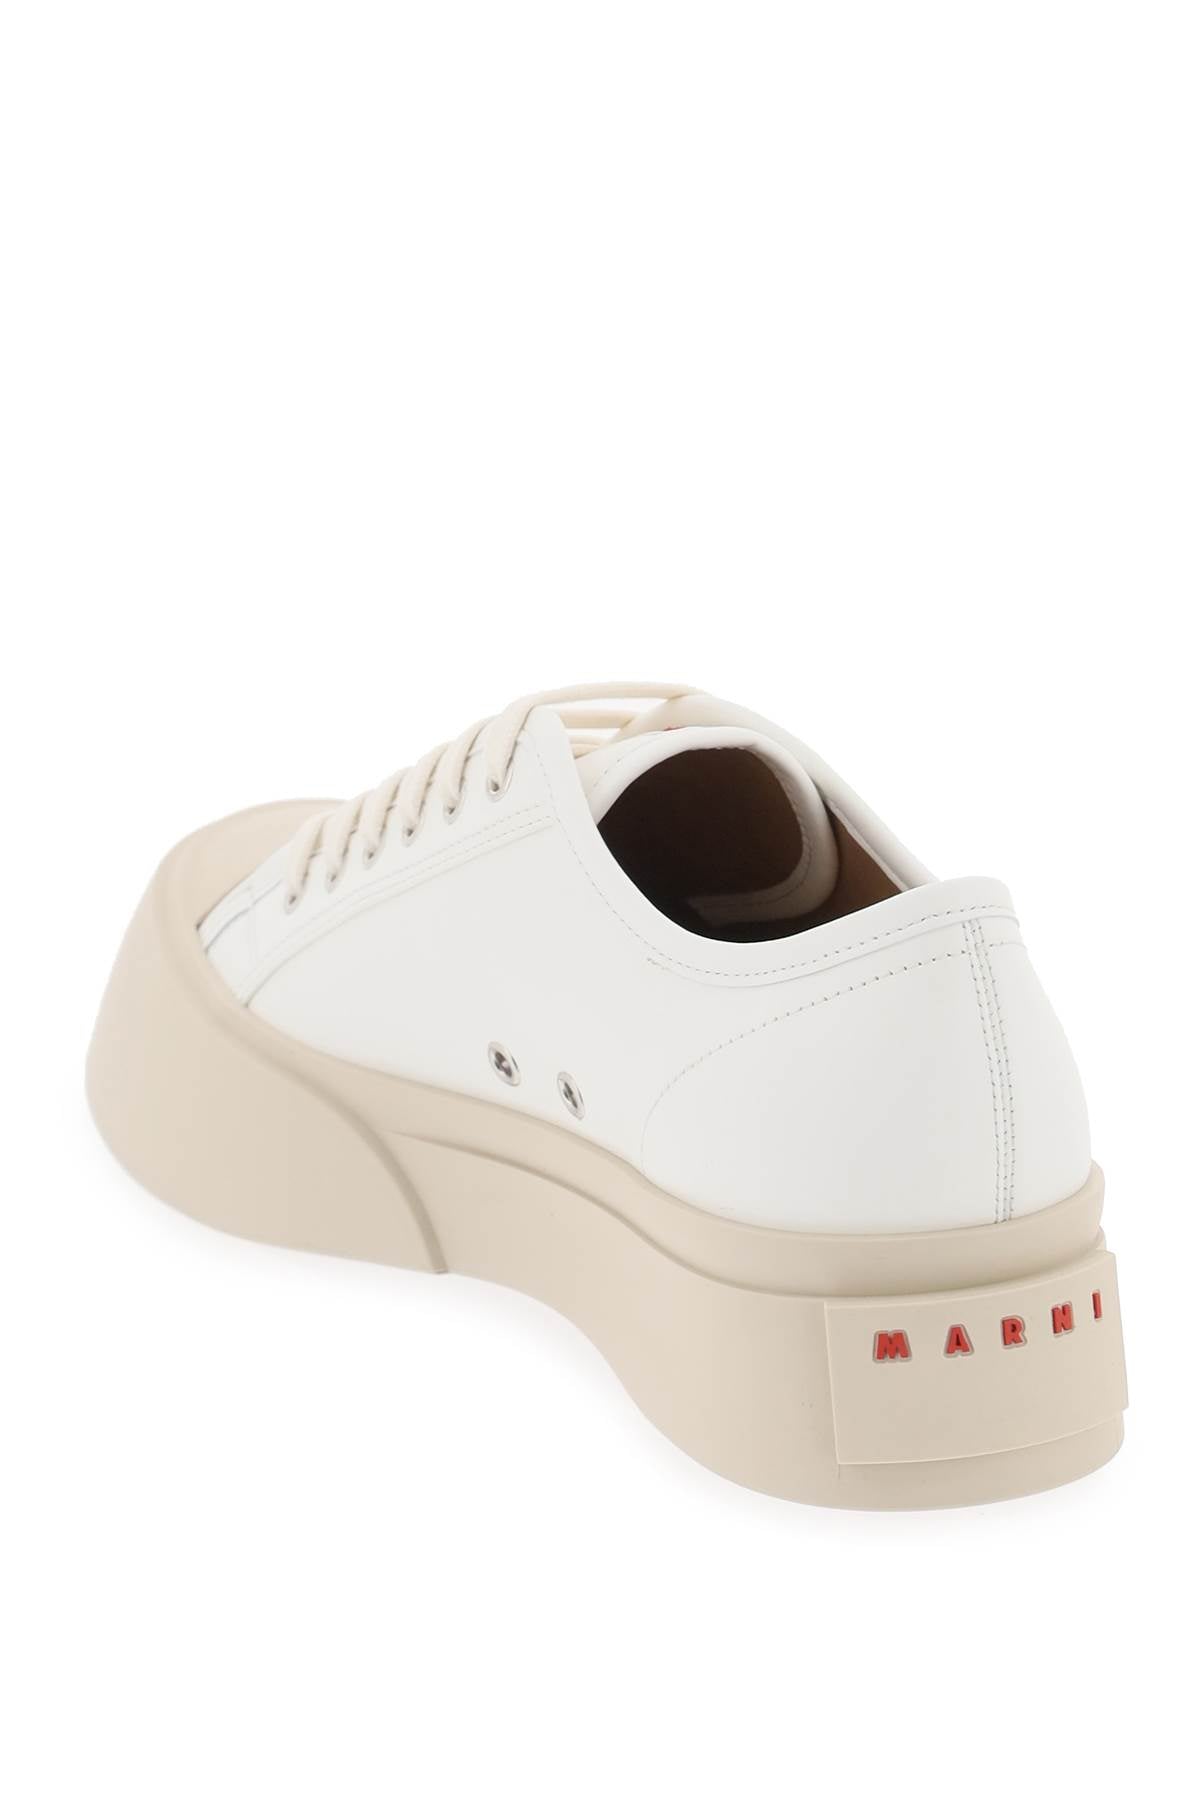 Shop Marni Leather Pablo Sneakers